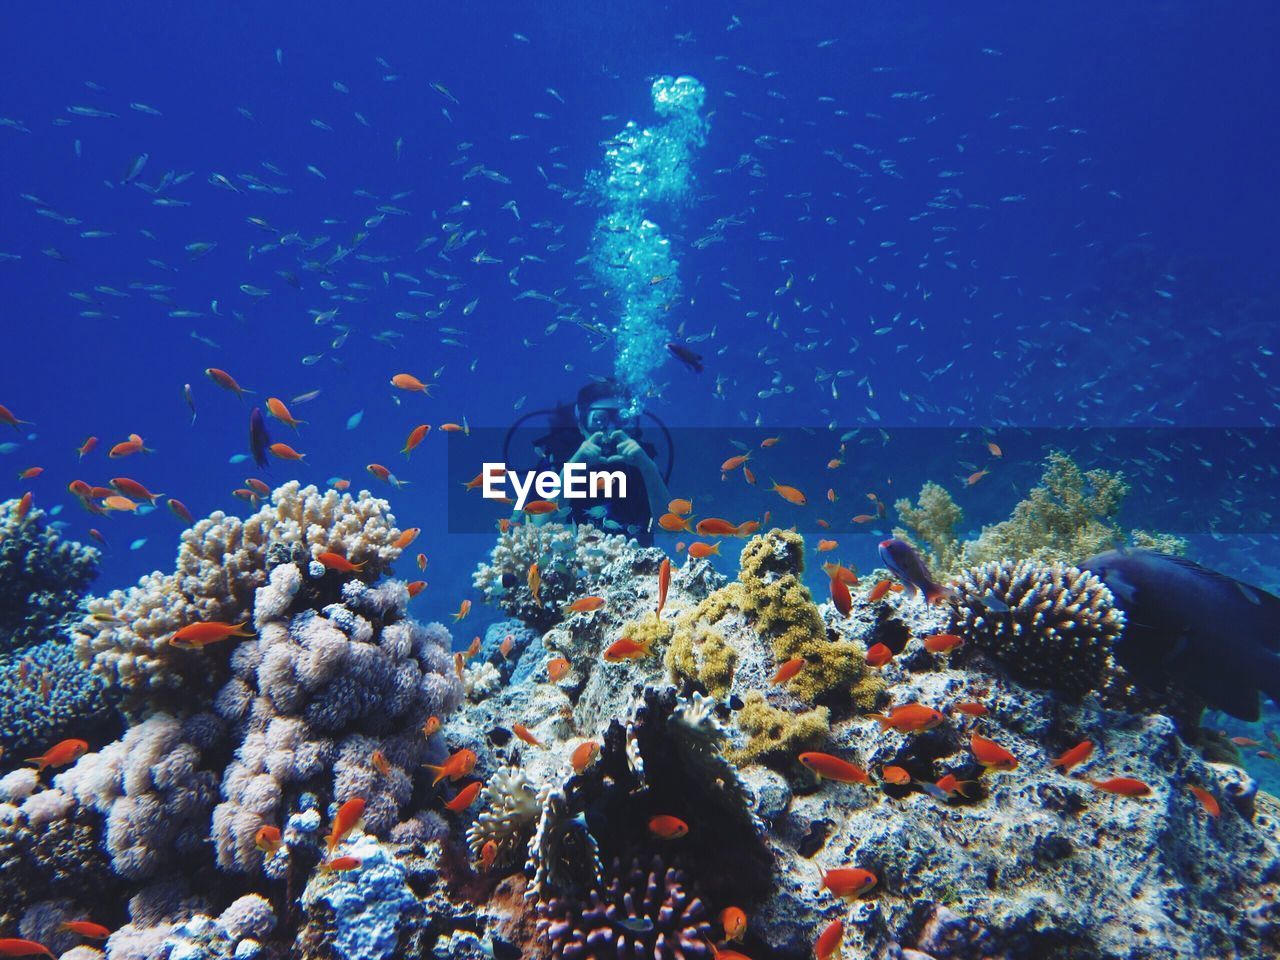 Person swimming by corals and fish in sea